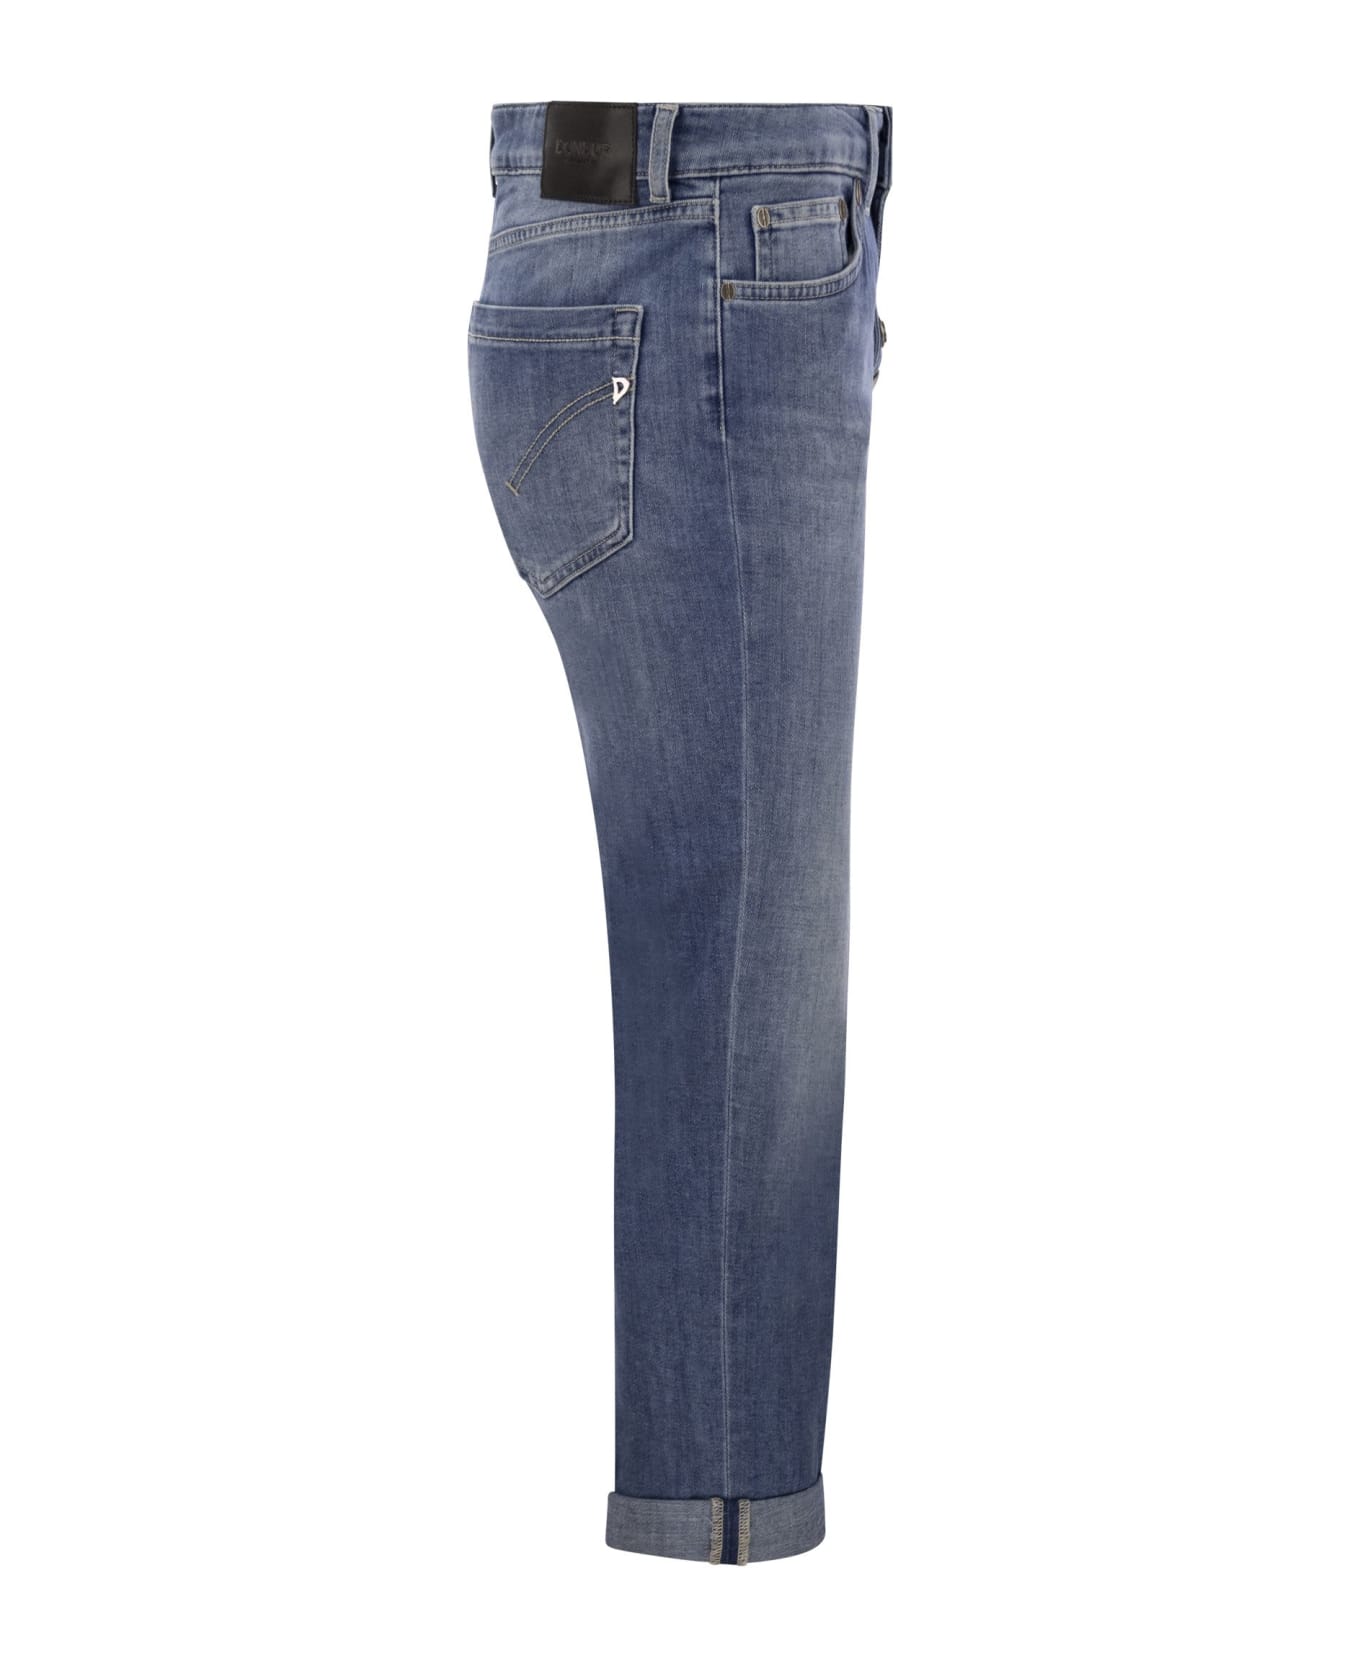 Dondup Koons - Loose Jeans With Jewelled Buttons - Blue ボトムス